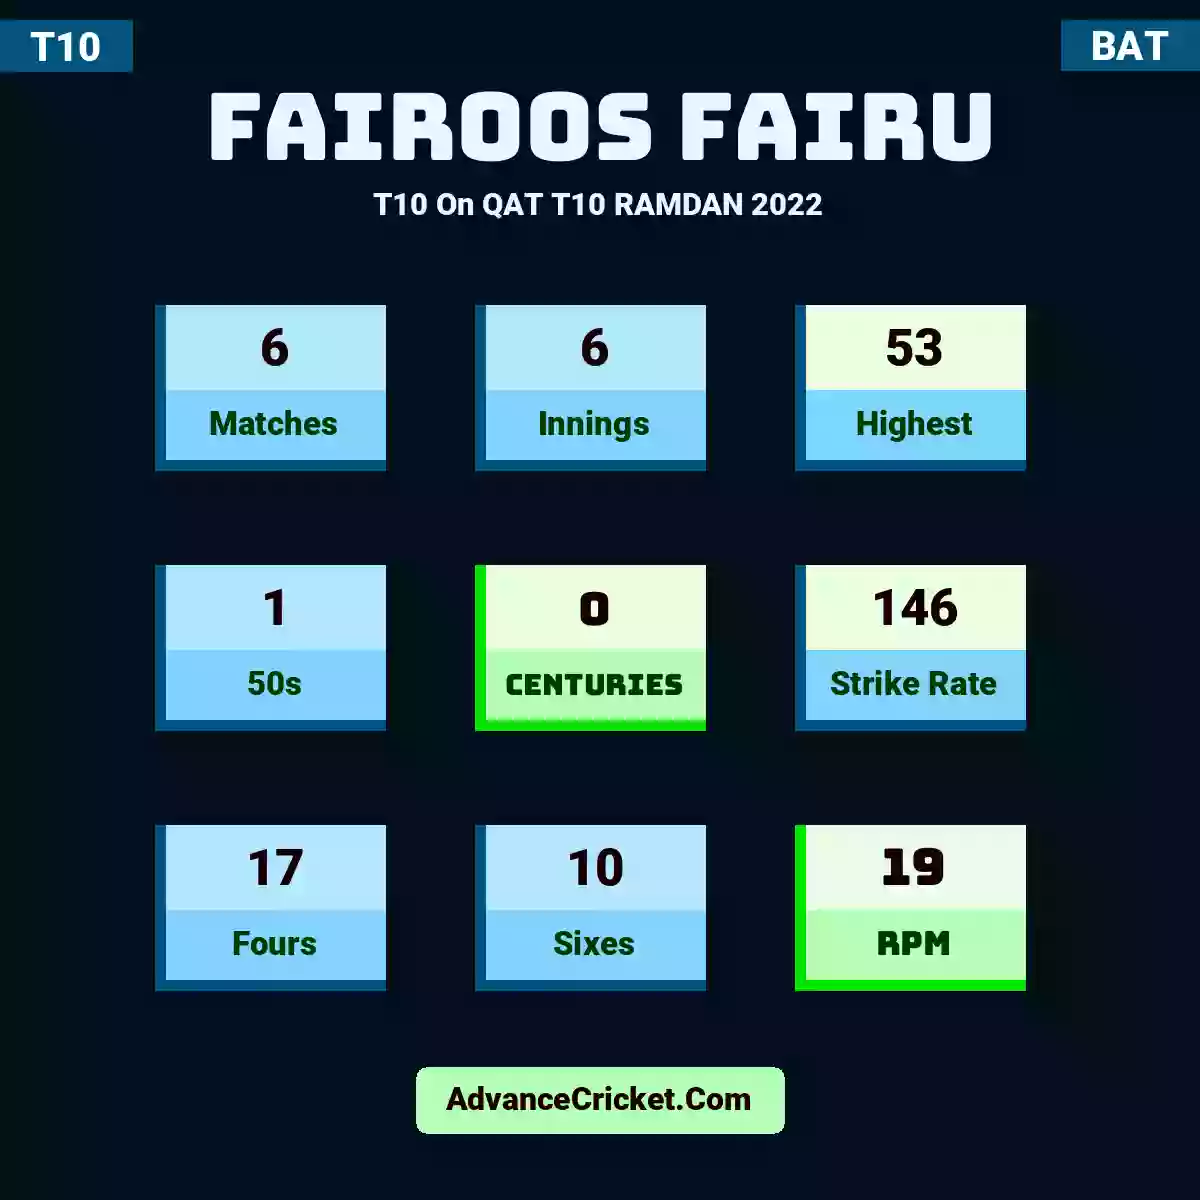 Fairoos Fairu T10  On QAT T10 RAMDAN 2022, Fairoos Fairu played 6 matches, scored 53 runs as highest, 1 half-centuries, and 0 centuries, with a strike rate of 146. F.Fairu hit 17 fours and 10 sixes, with an RPM of 19.